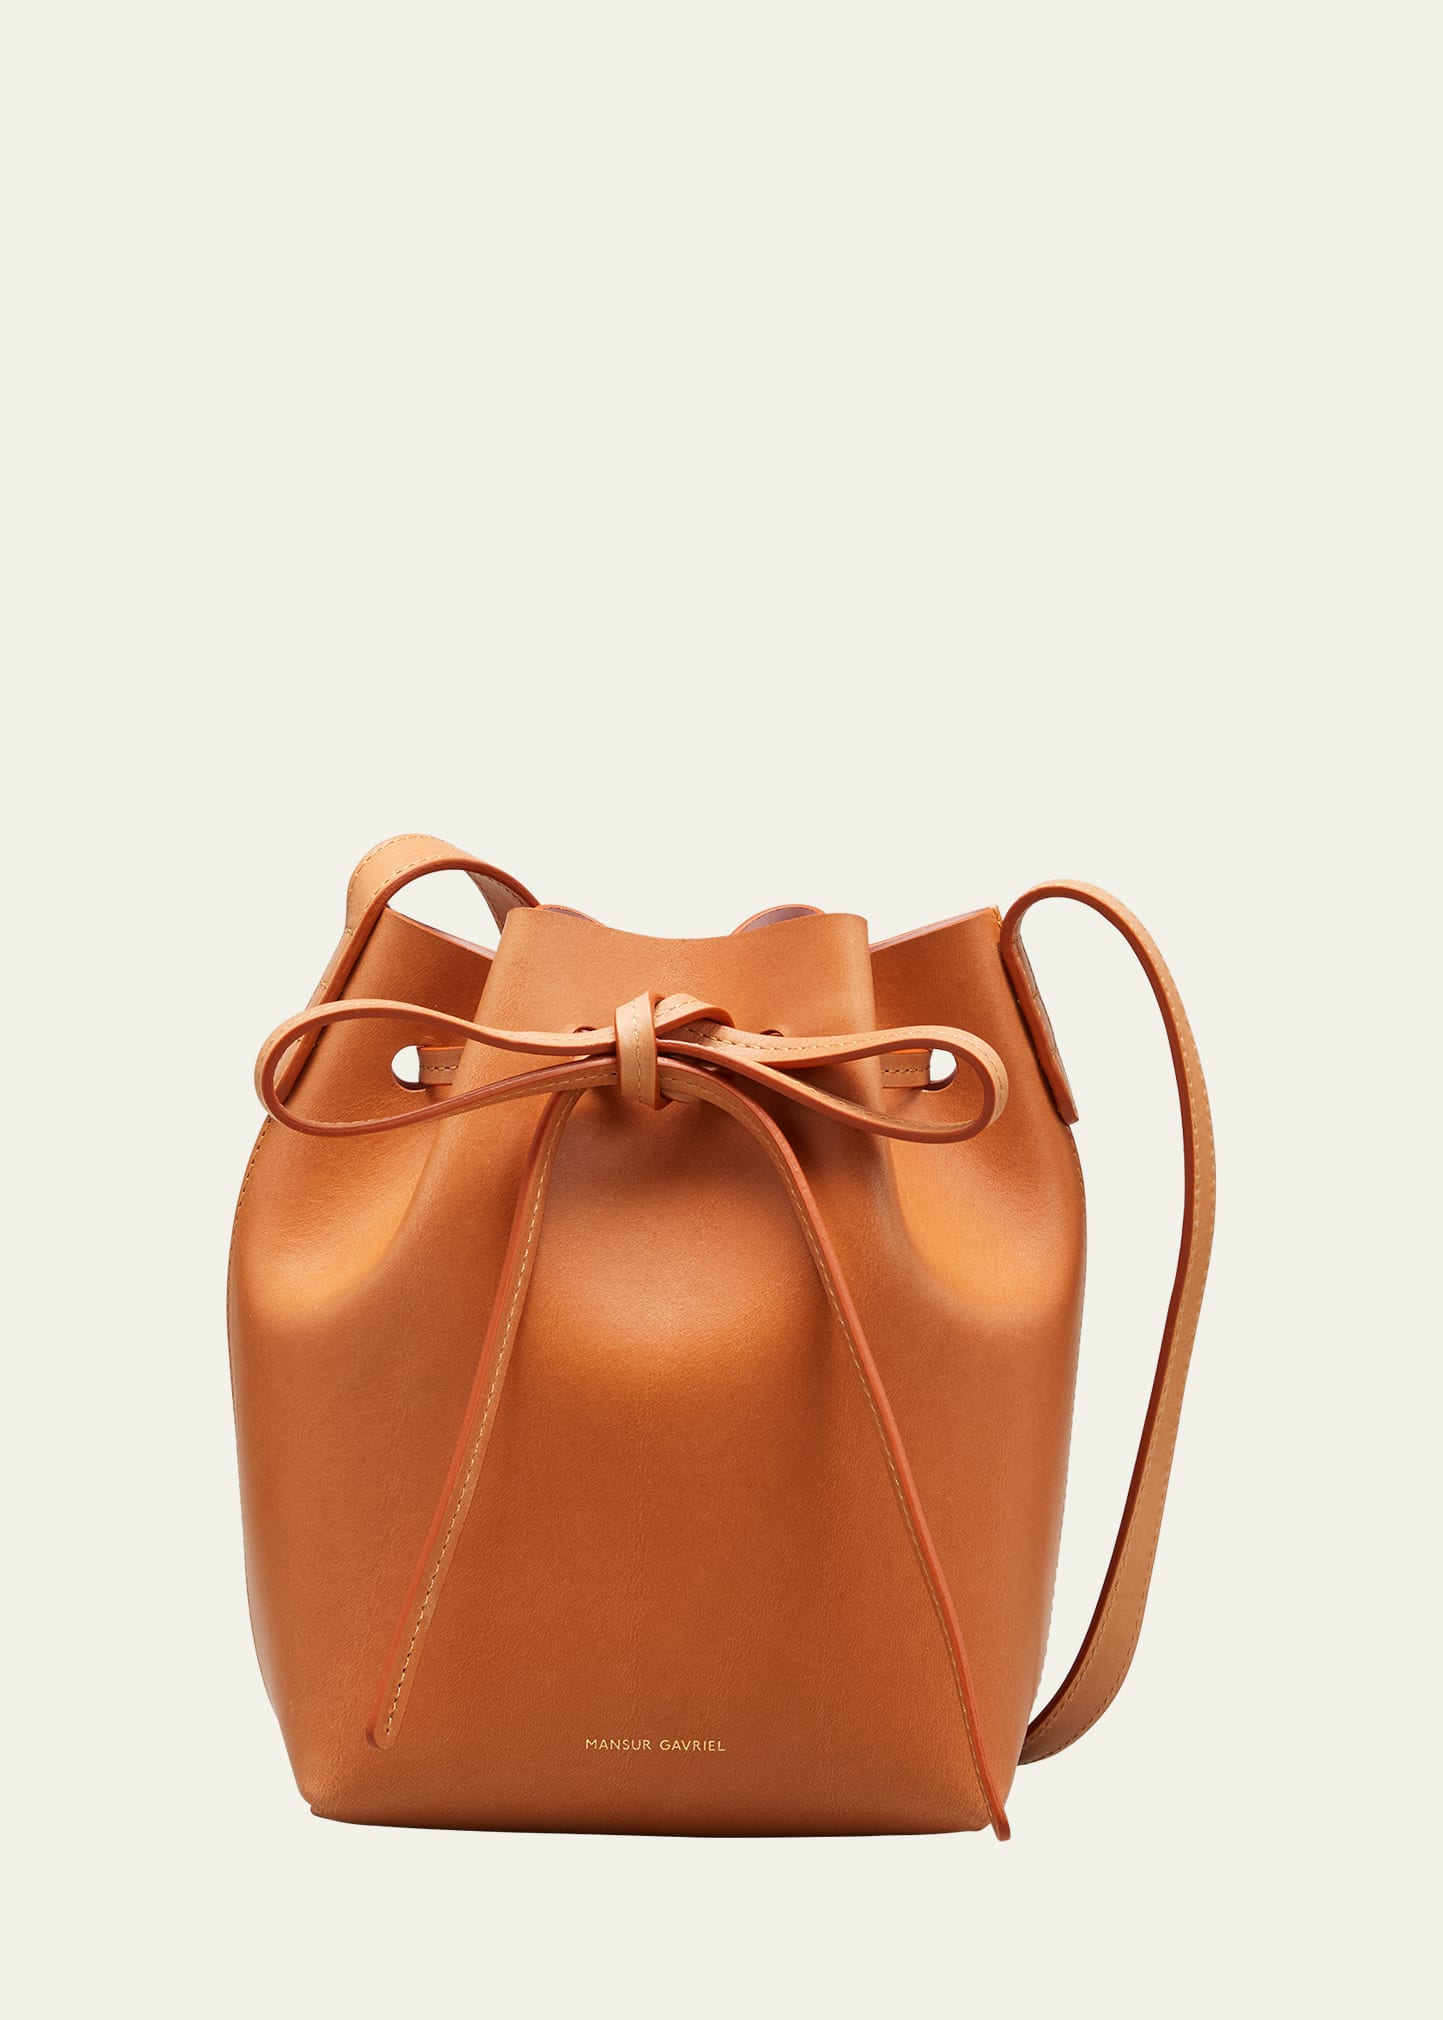 Mansur Gavriel - Our Italian Canvas Bucket Bag in Beige featuring an  interior zip pocket and trimmed with our signature vegetable tanned leather  ✨💛#mansurgavriel